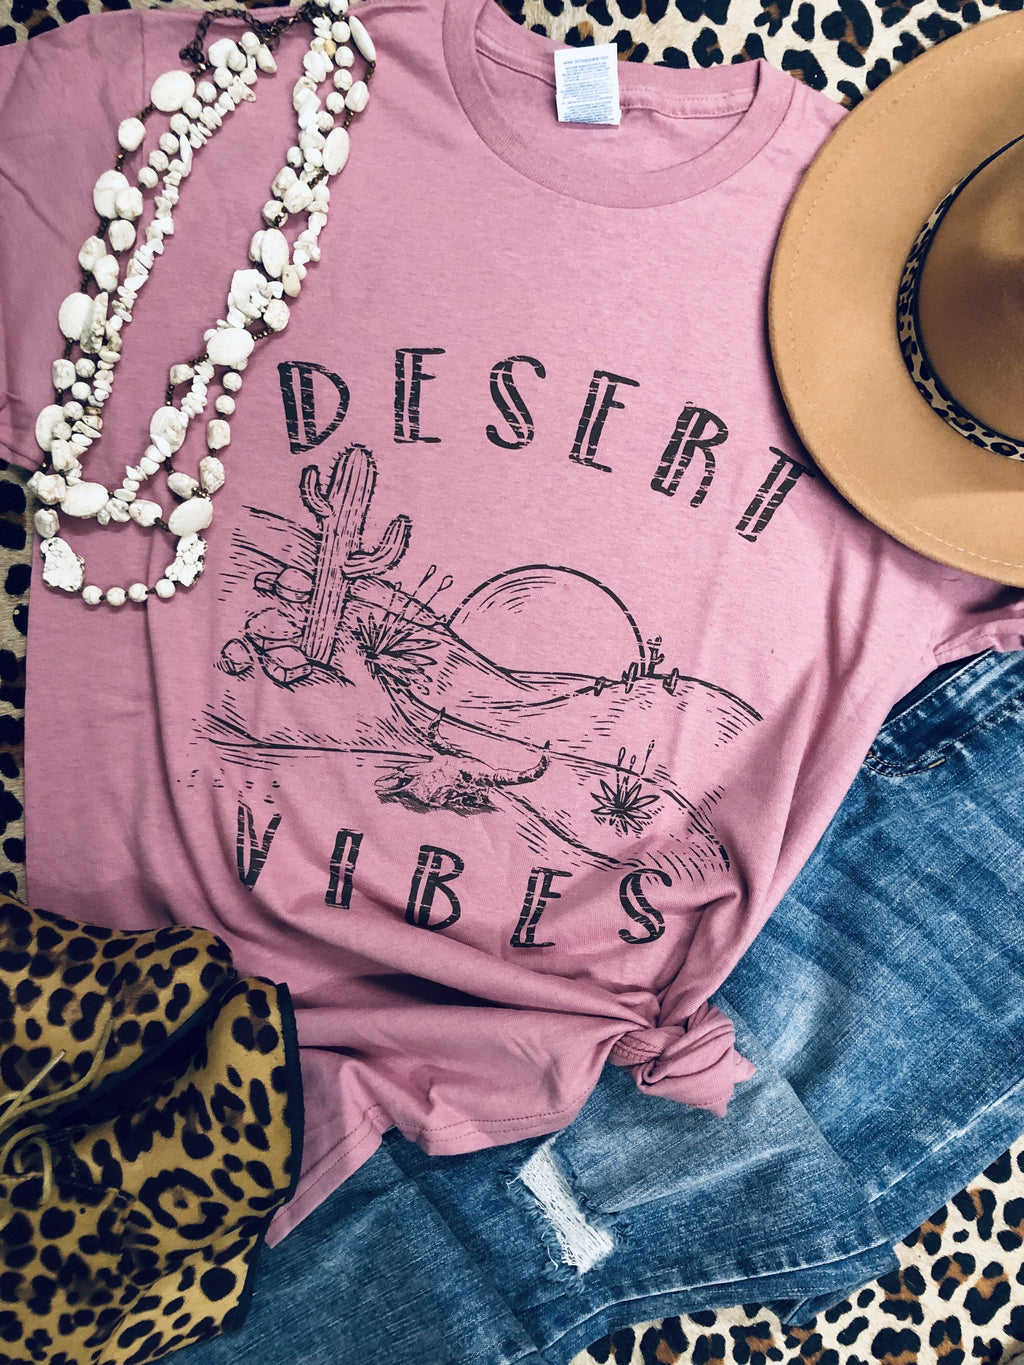 Desert Vibes - Smarty Pants Boutique NH